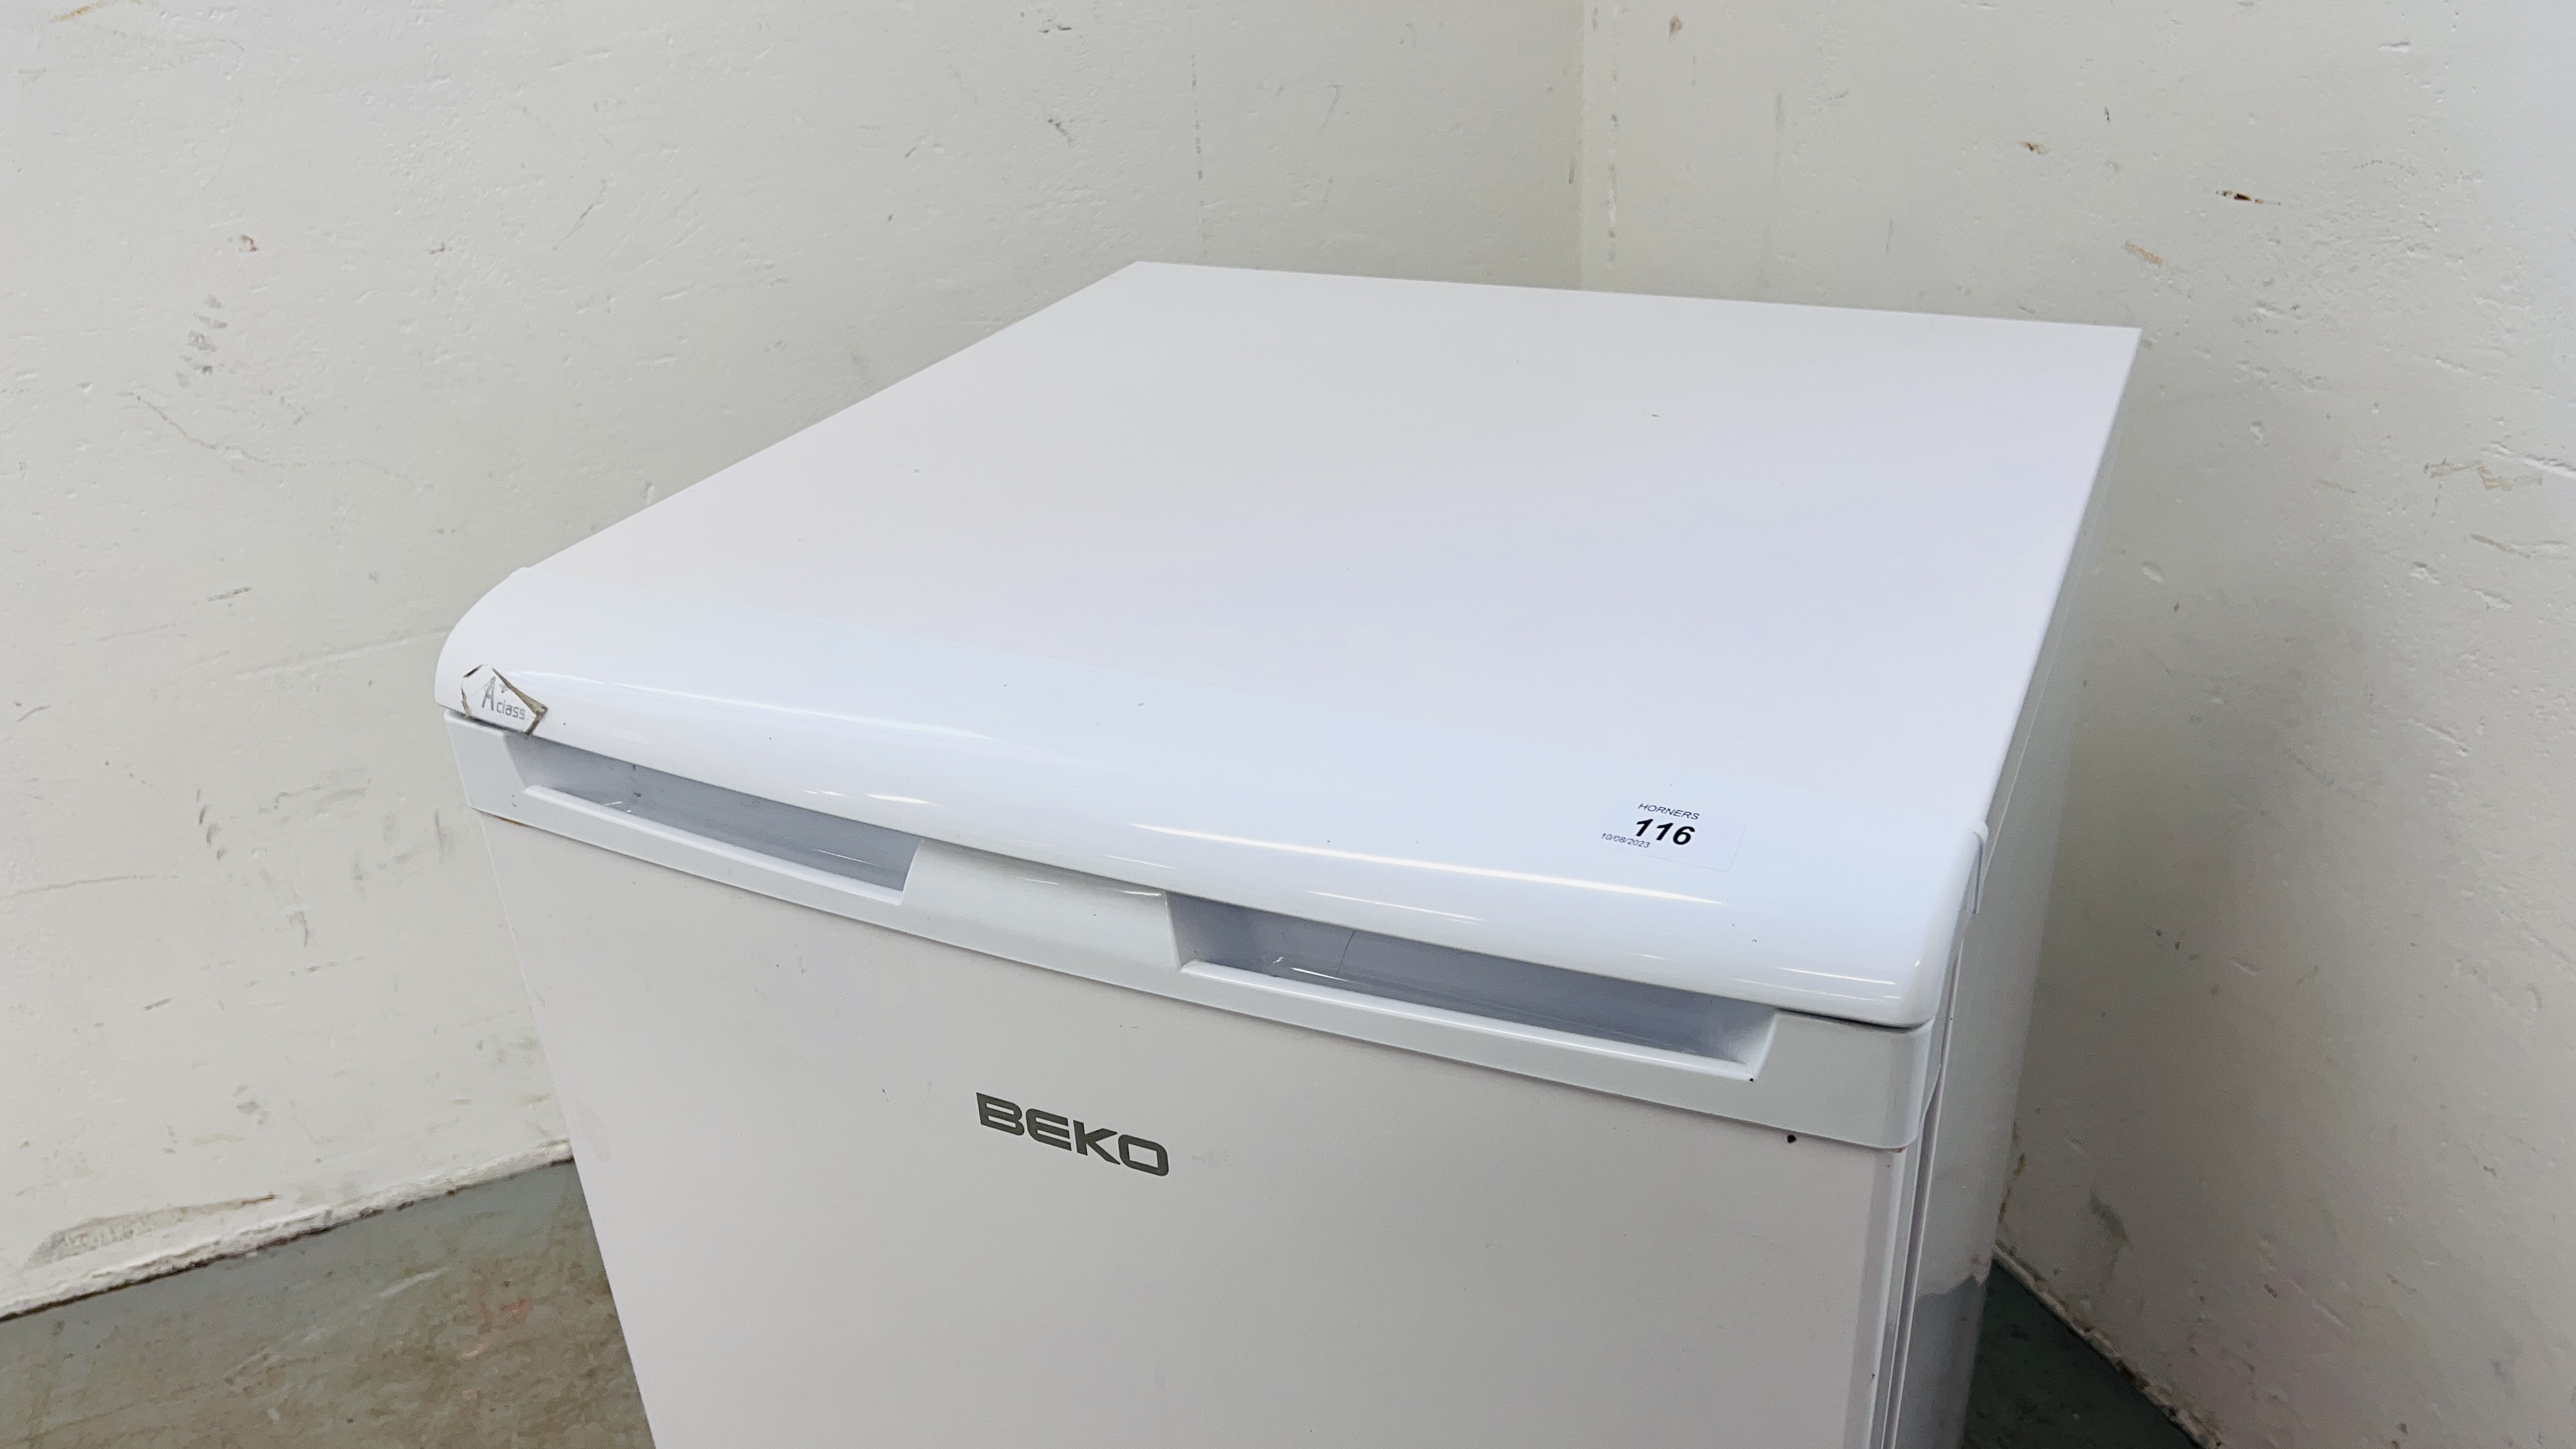 A BEKO UNDERCOUNTER FREEZER - SOLD AS SEEN. - Image 2 of 5